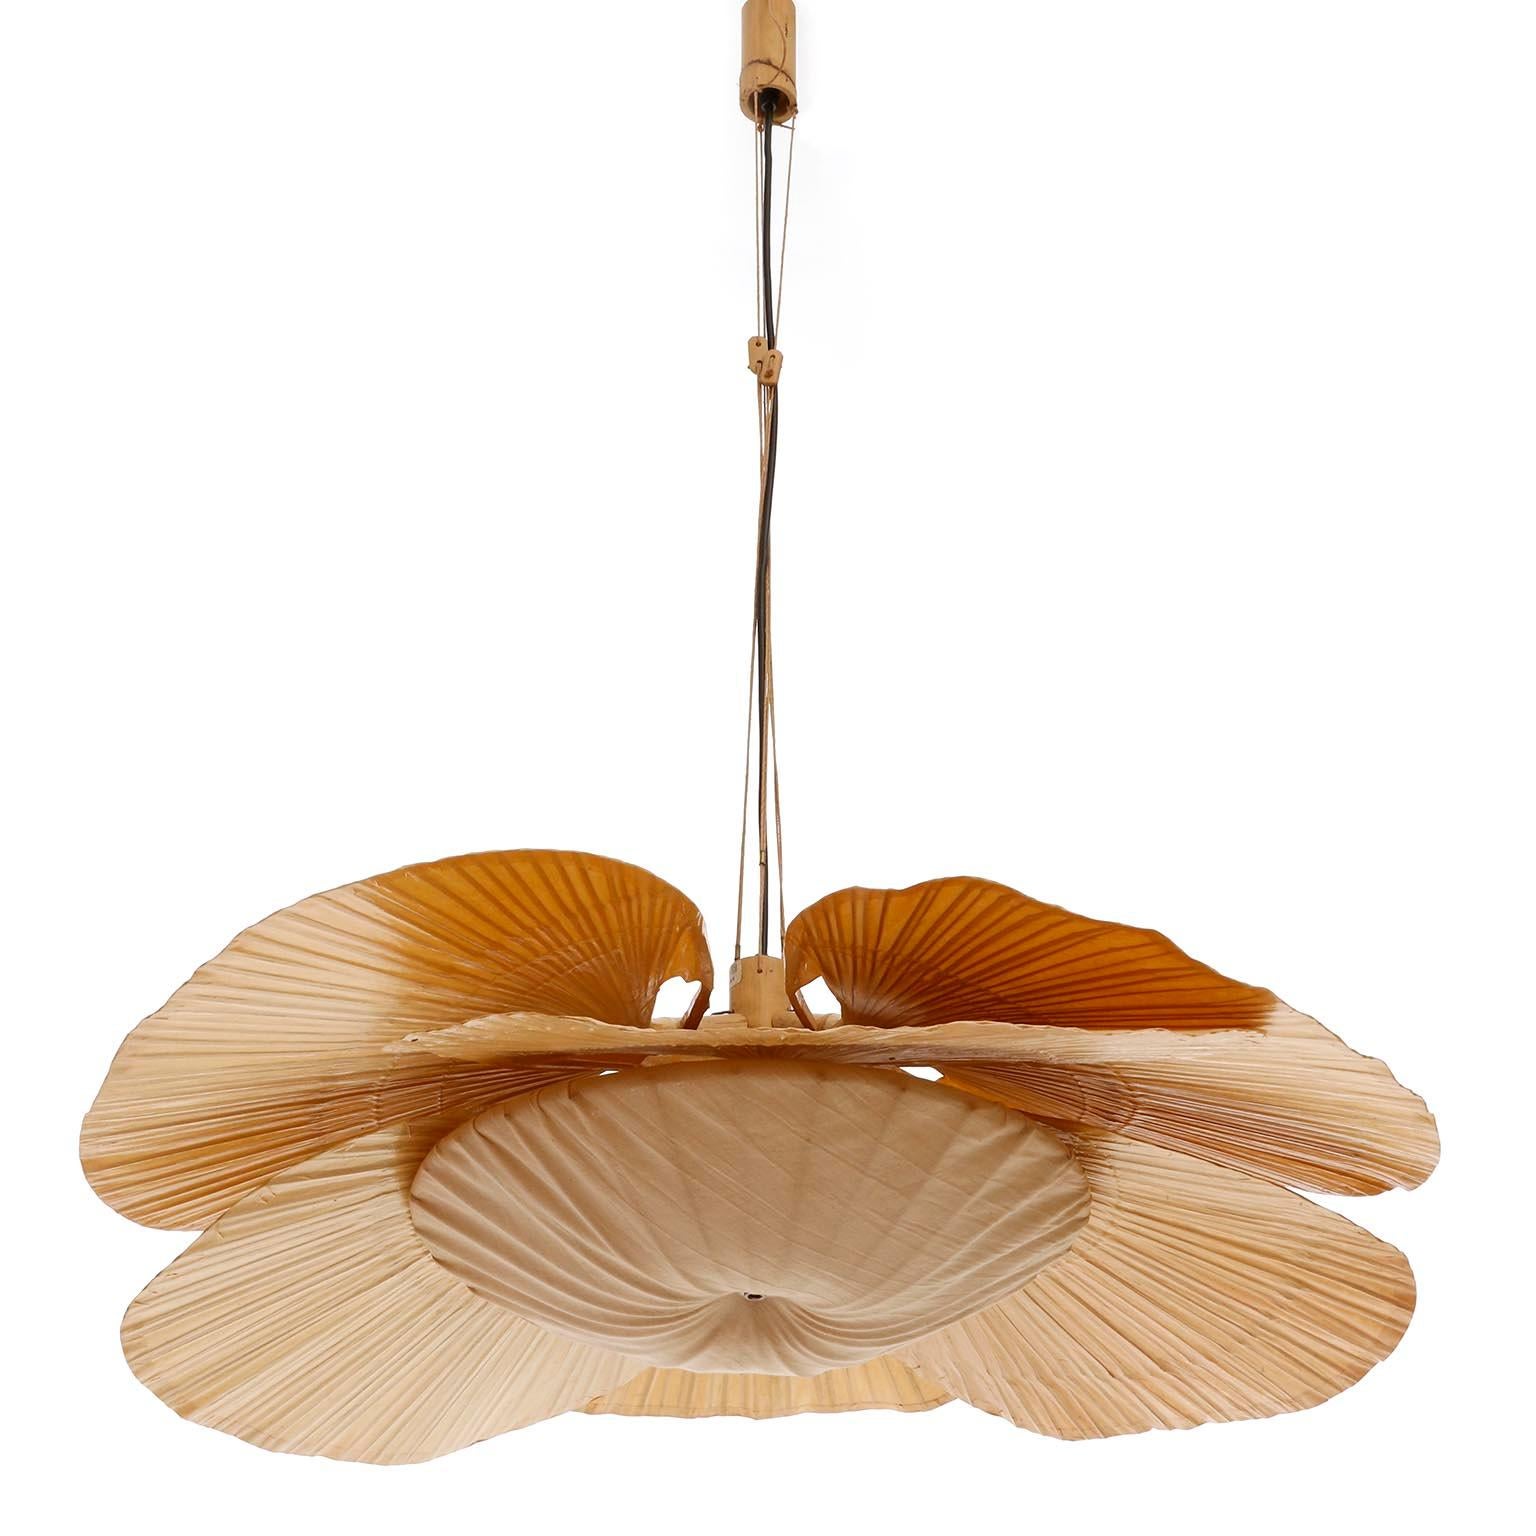 A large and sculptural ‘Uchiwa’ light fixture with six large rice paper palm shaped leaves connected to a bamboo shaft by Ingo Maurer, Germany, 1970s.
A very hard to find piece, especially in this very good condition.
This lamp was handmade of